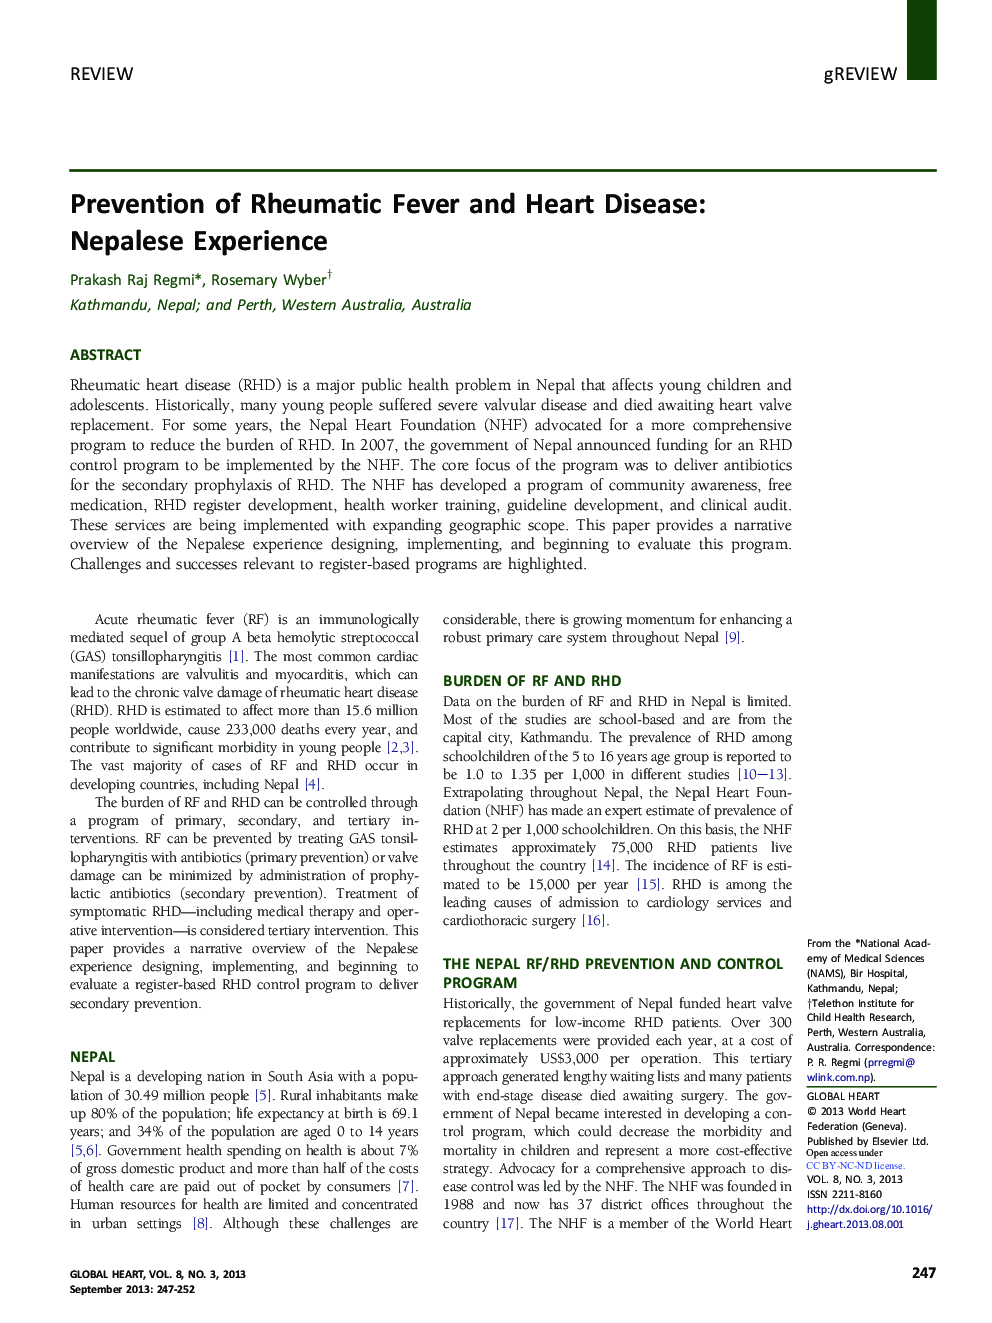 Prevention of Rheumatic Fever and Heart Disease: Nepalese Experience